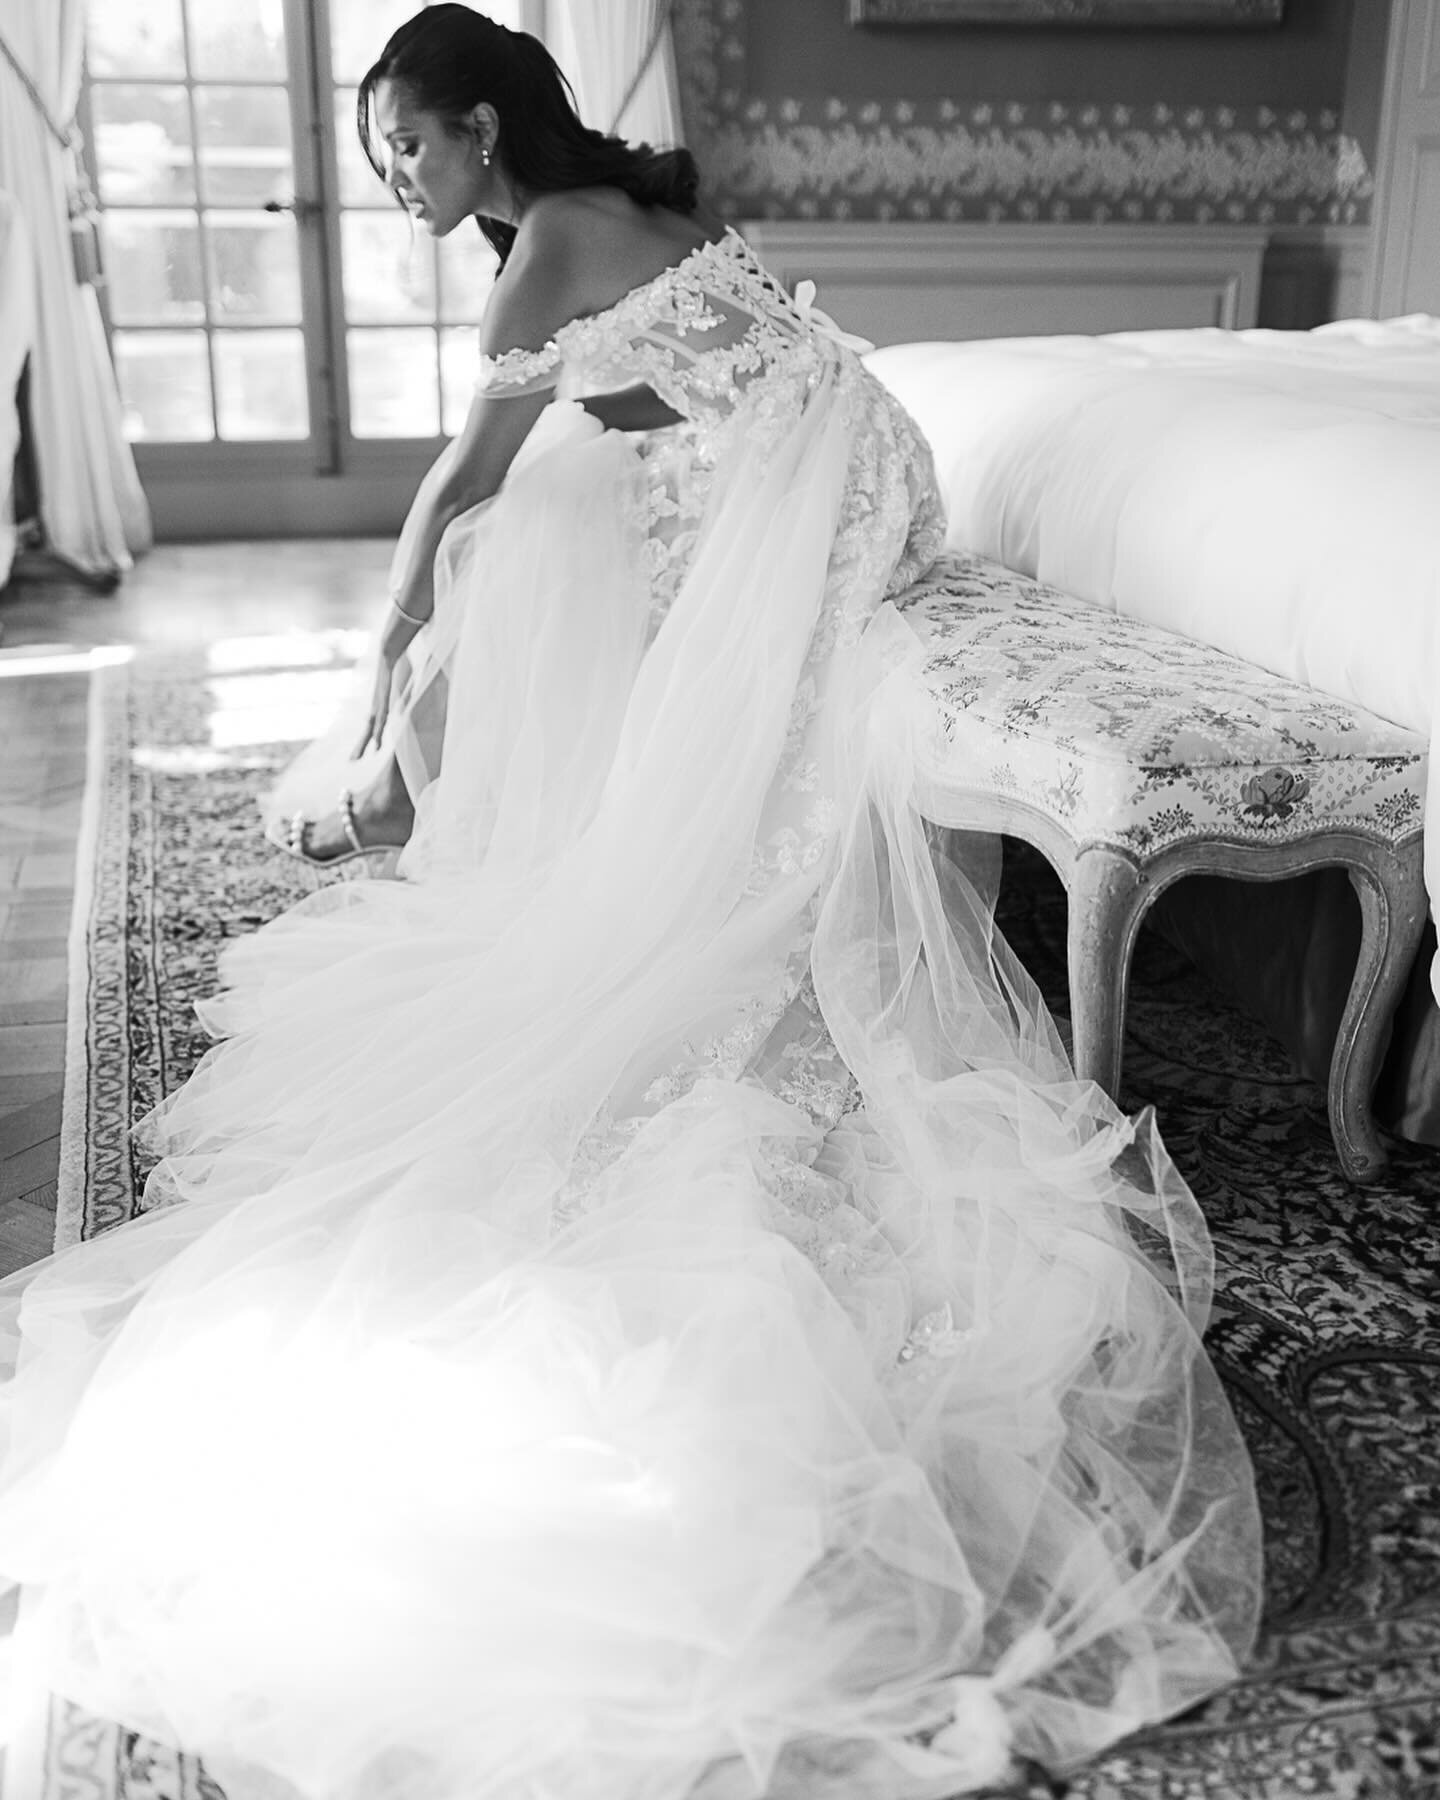 Timeless Beauty Meets Modern Romance ✨ Our bride, Tierra was a vision of timeless sophistication in her @galialahav gown. Her cathedral-length veil added a touch of elegance, perfect for the grandeur of @chateau_de_villette 

Featured in @brides 

Pl